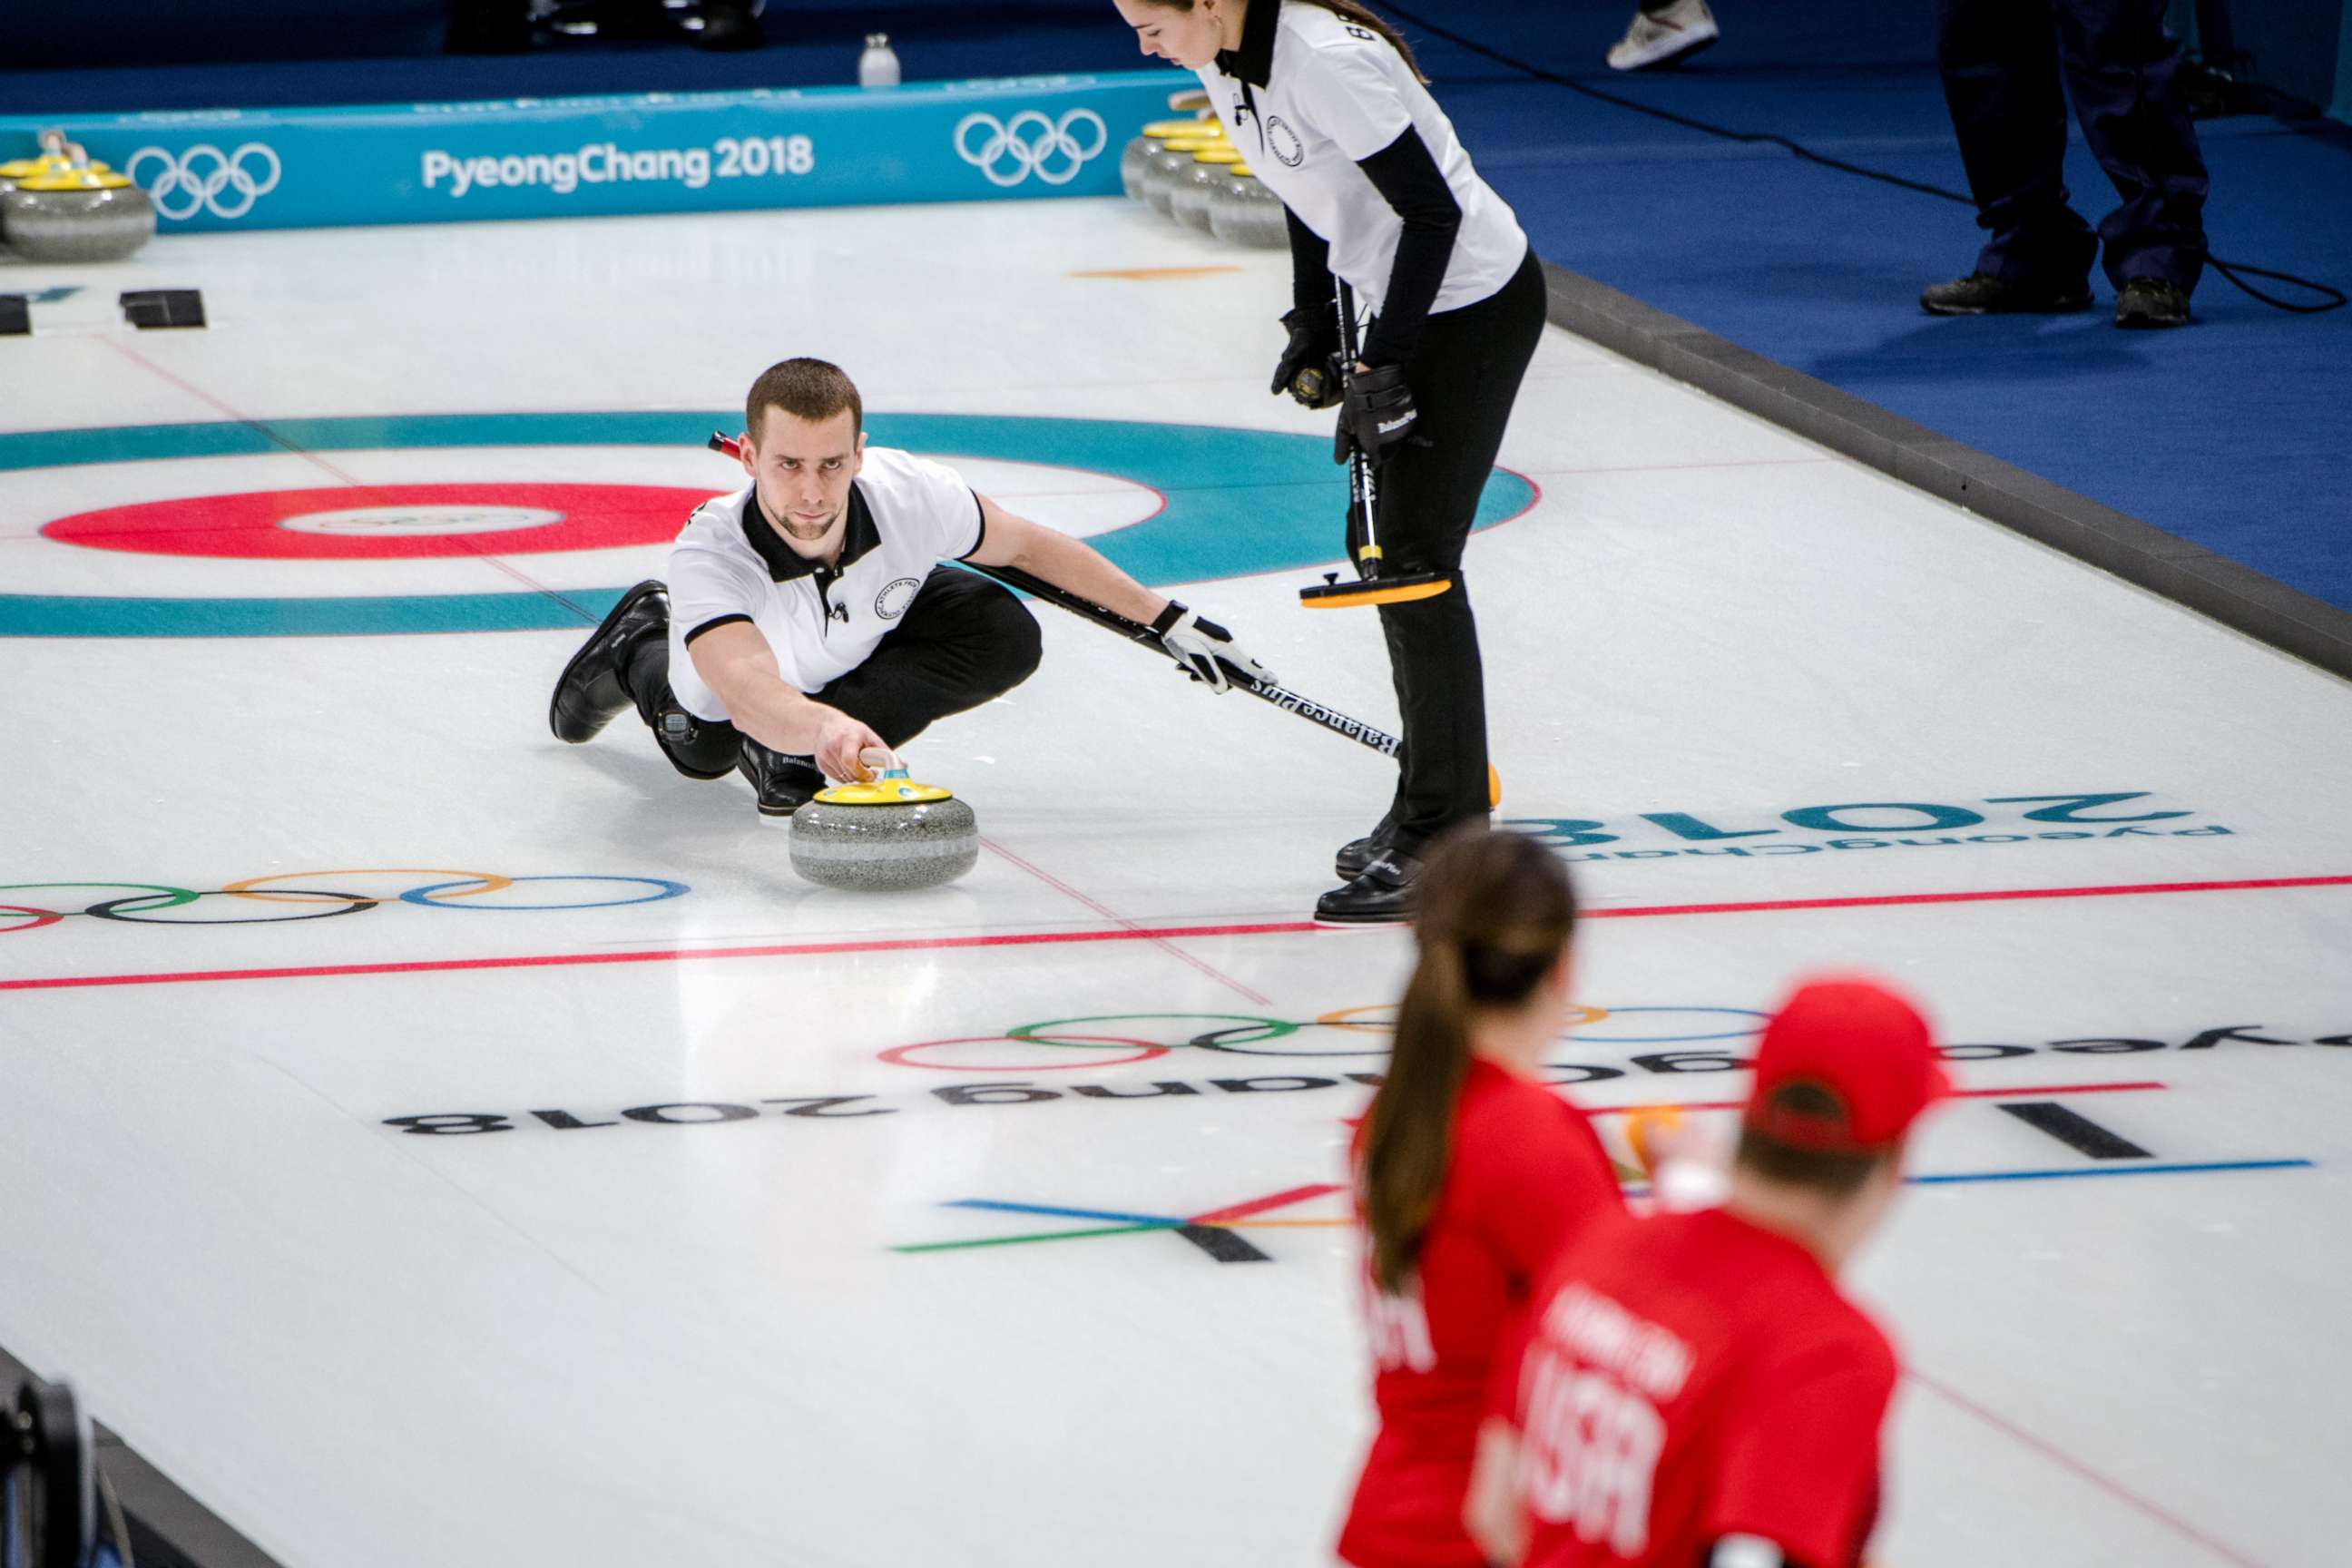 PHOTO: The Russian athletes Aleksandr Krushelnitcki and Anastasia Bryzgalova in action against the American siblings Matt and Becca Hamilton, in the mixed doubles curling event at the Gangneung Curling Center in Gangneung, South Korea, Feb. 8, 2018. 